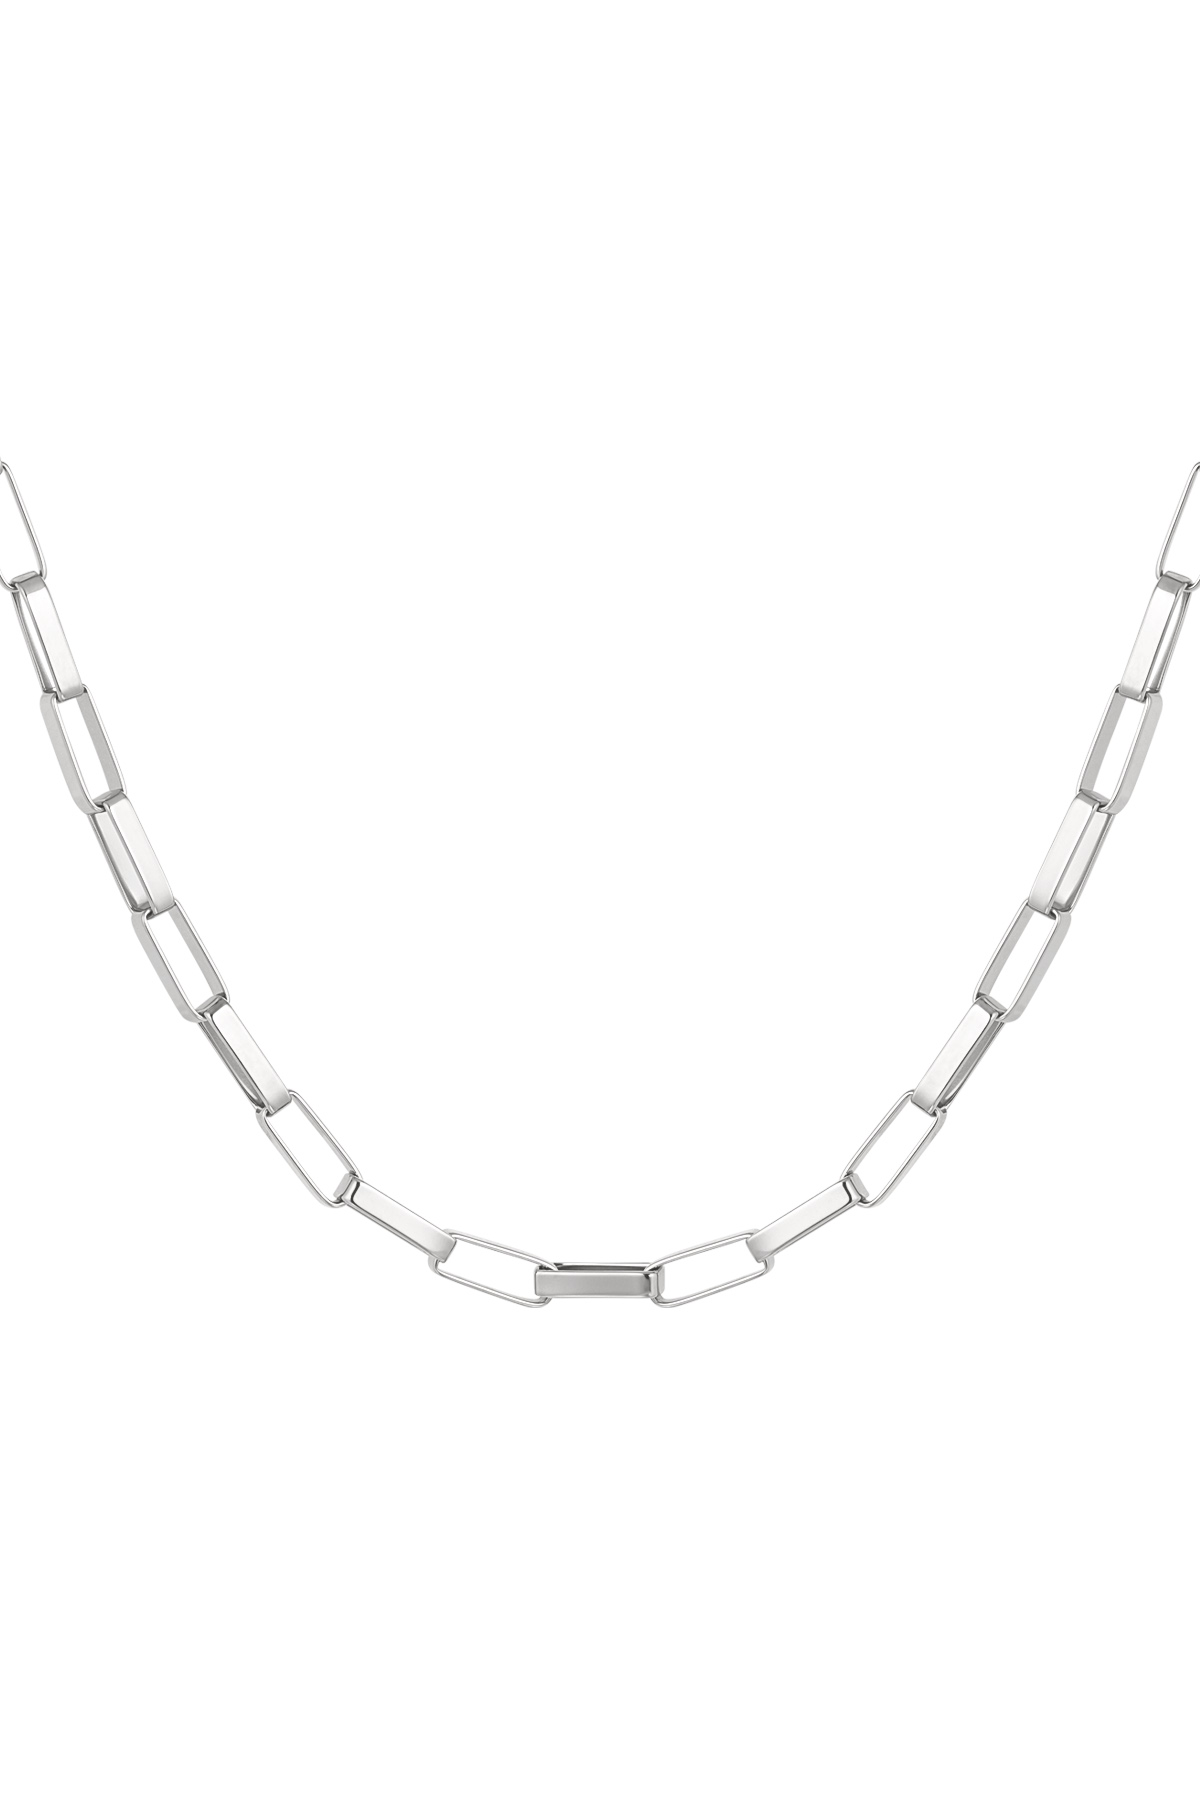 Link chain elongated links - silver h5 